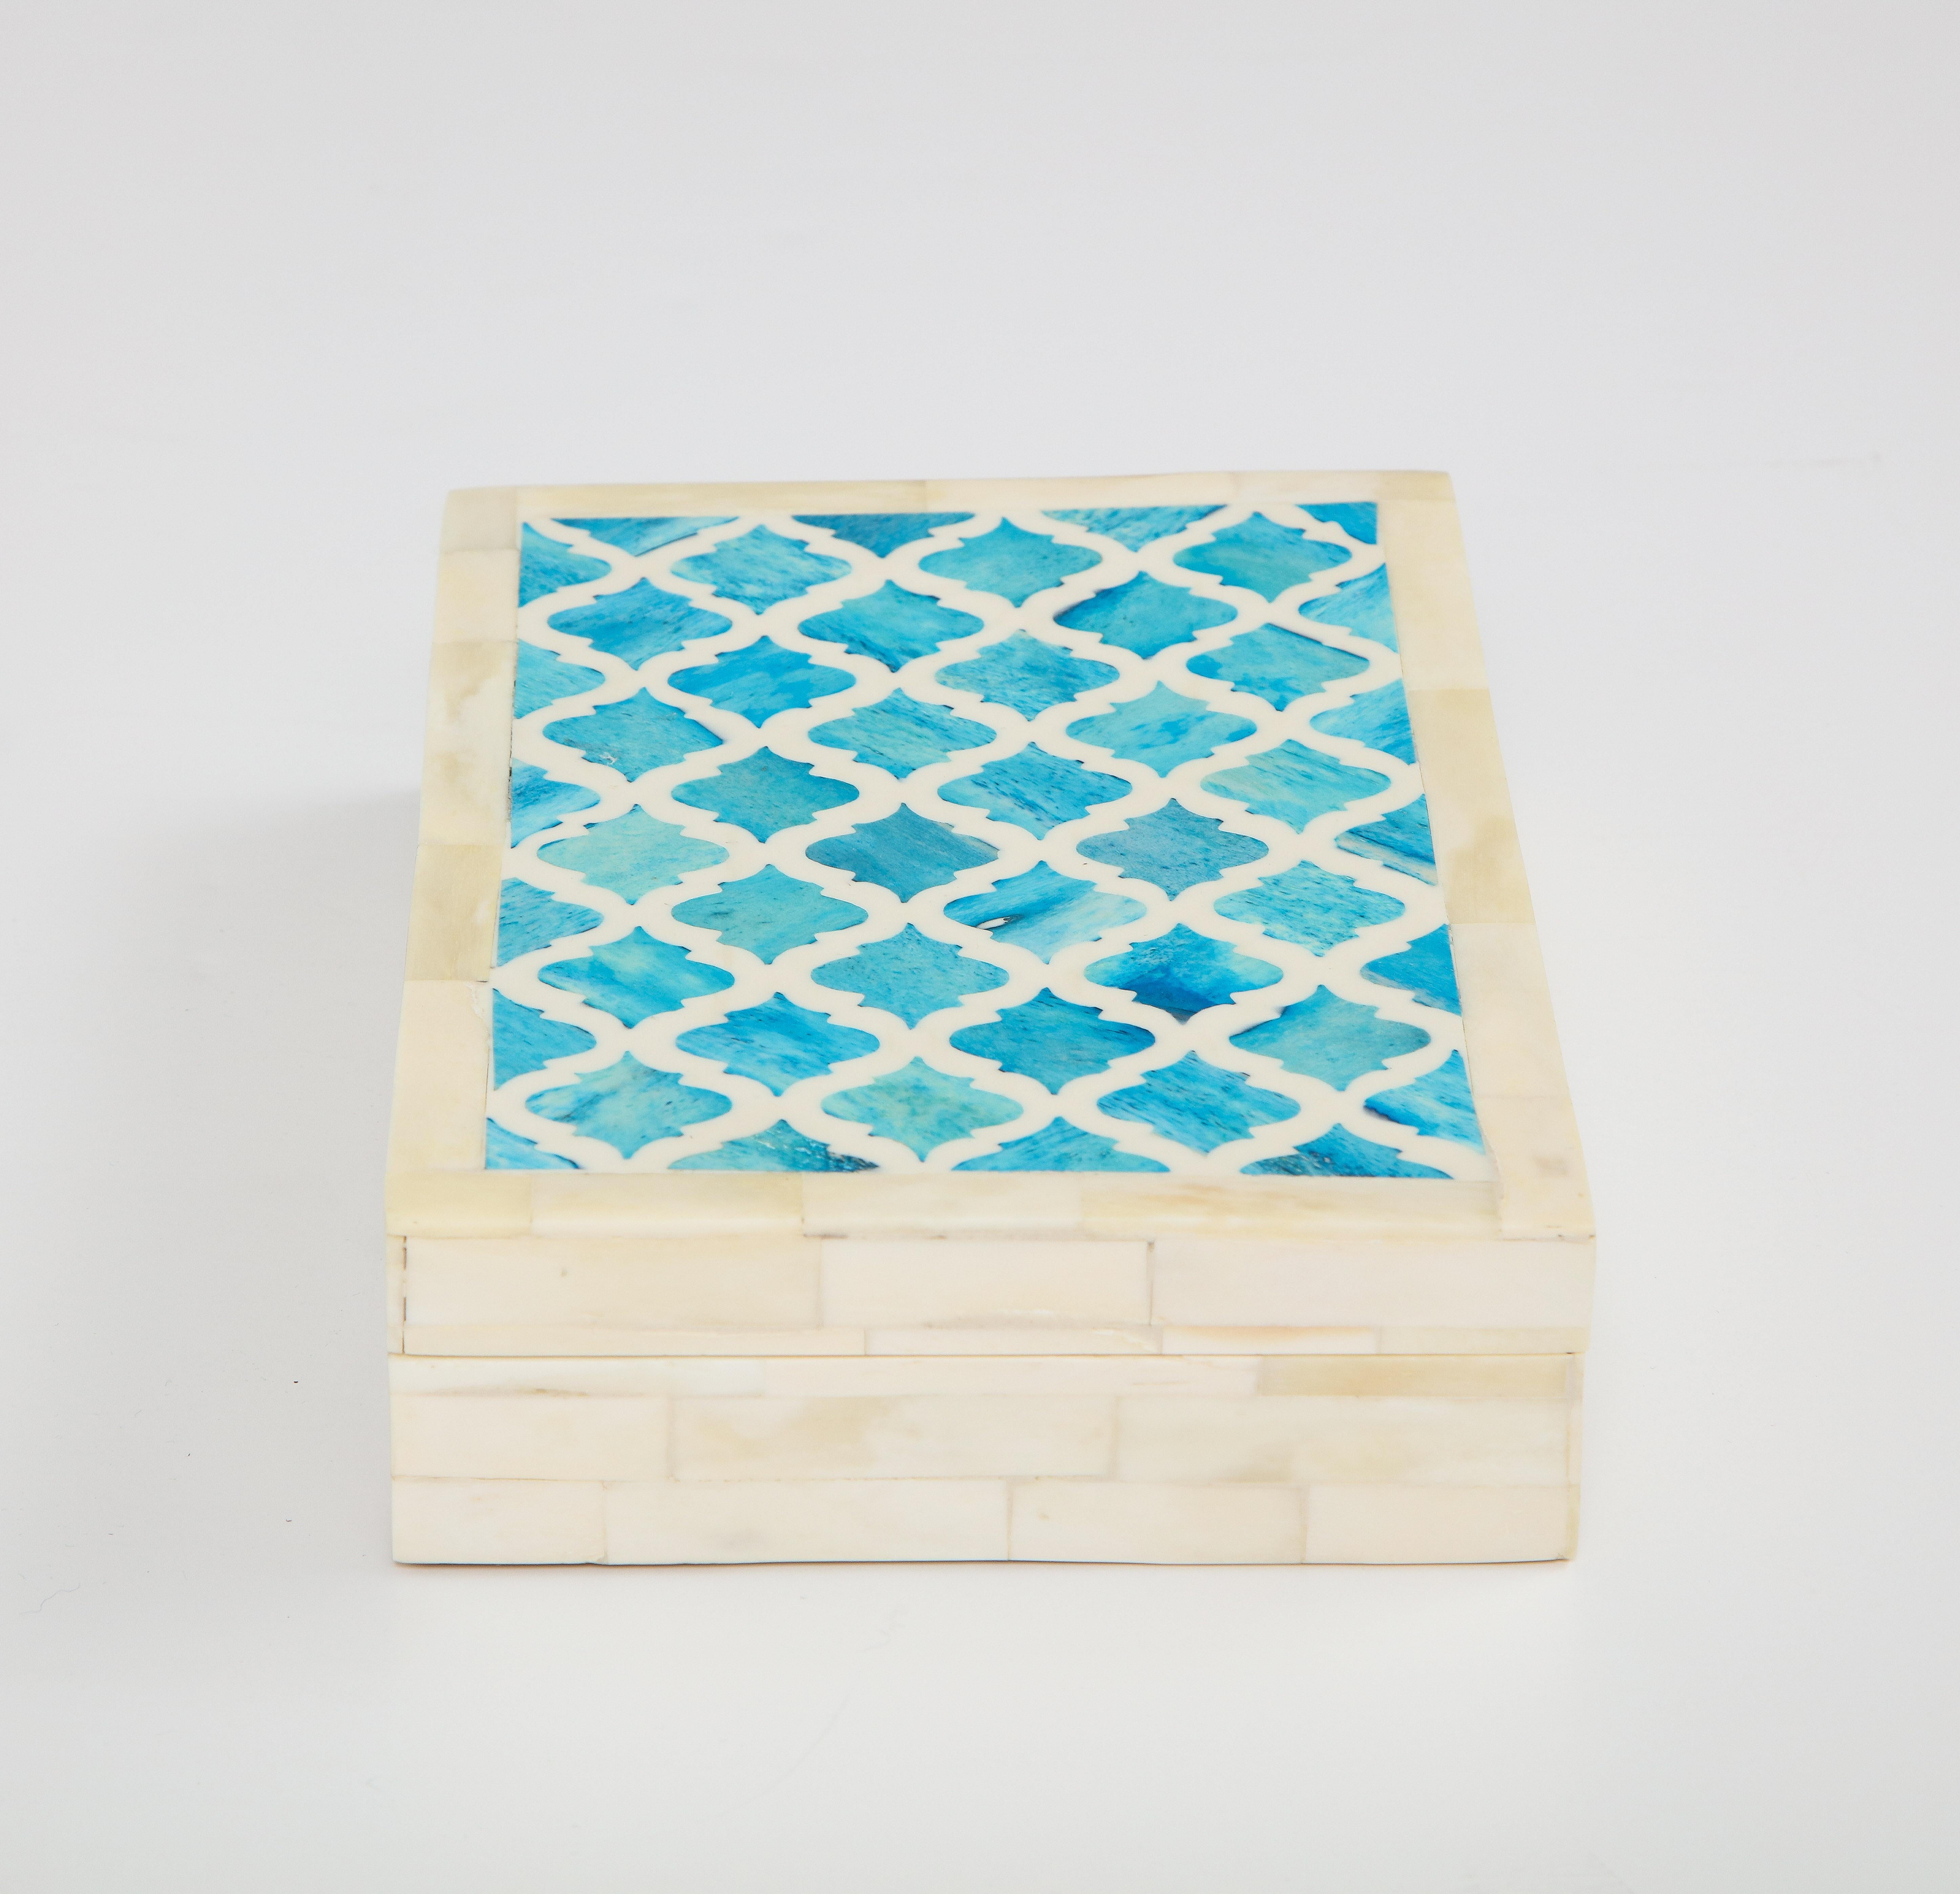 Decorative keepsake/jewelry box clad in natural and dyed bone tiles. Top is in a Moorish motif of inlaid Turquoise bone elements. Handcrafted.